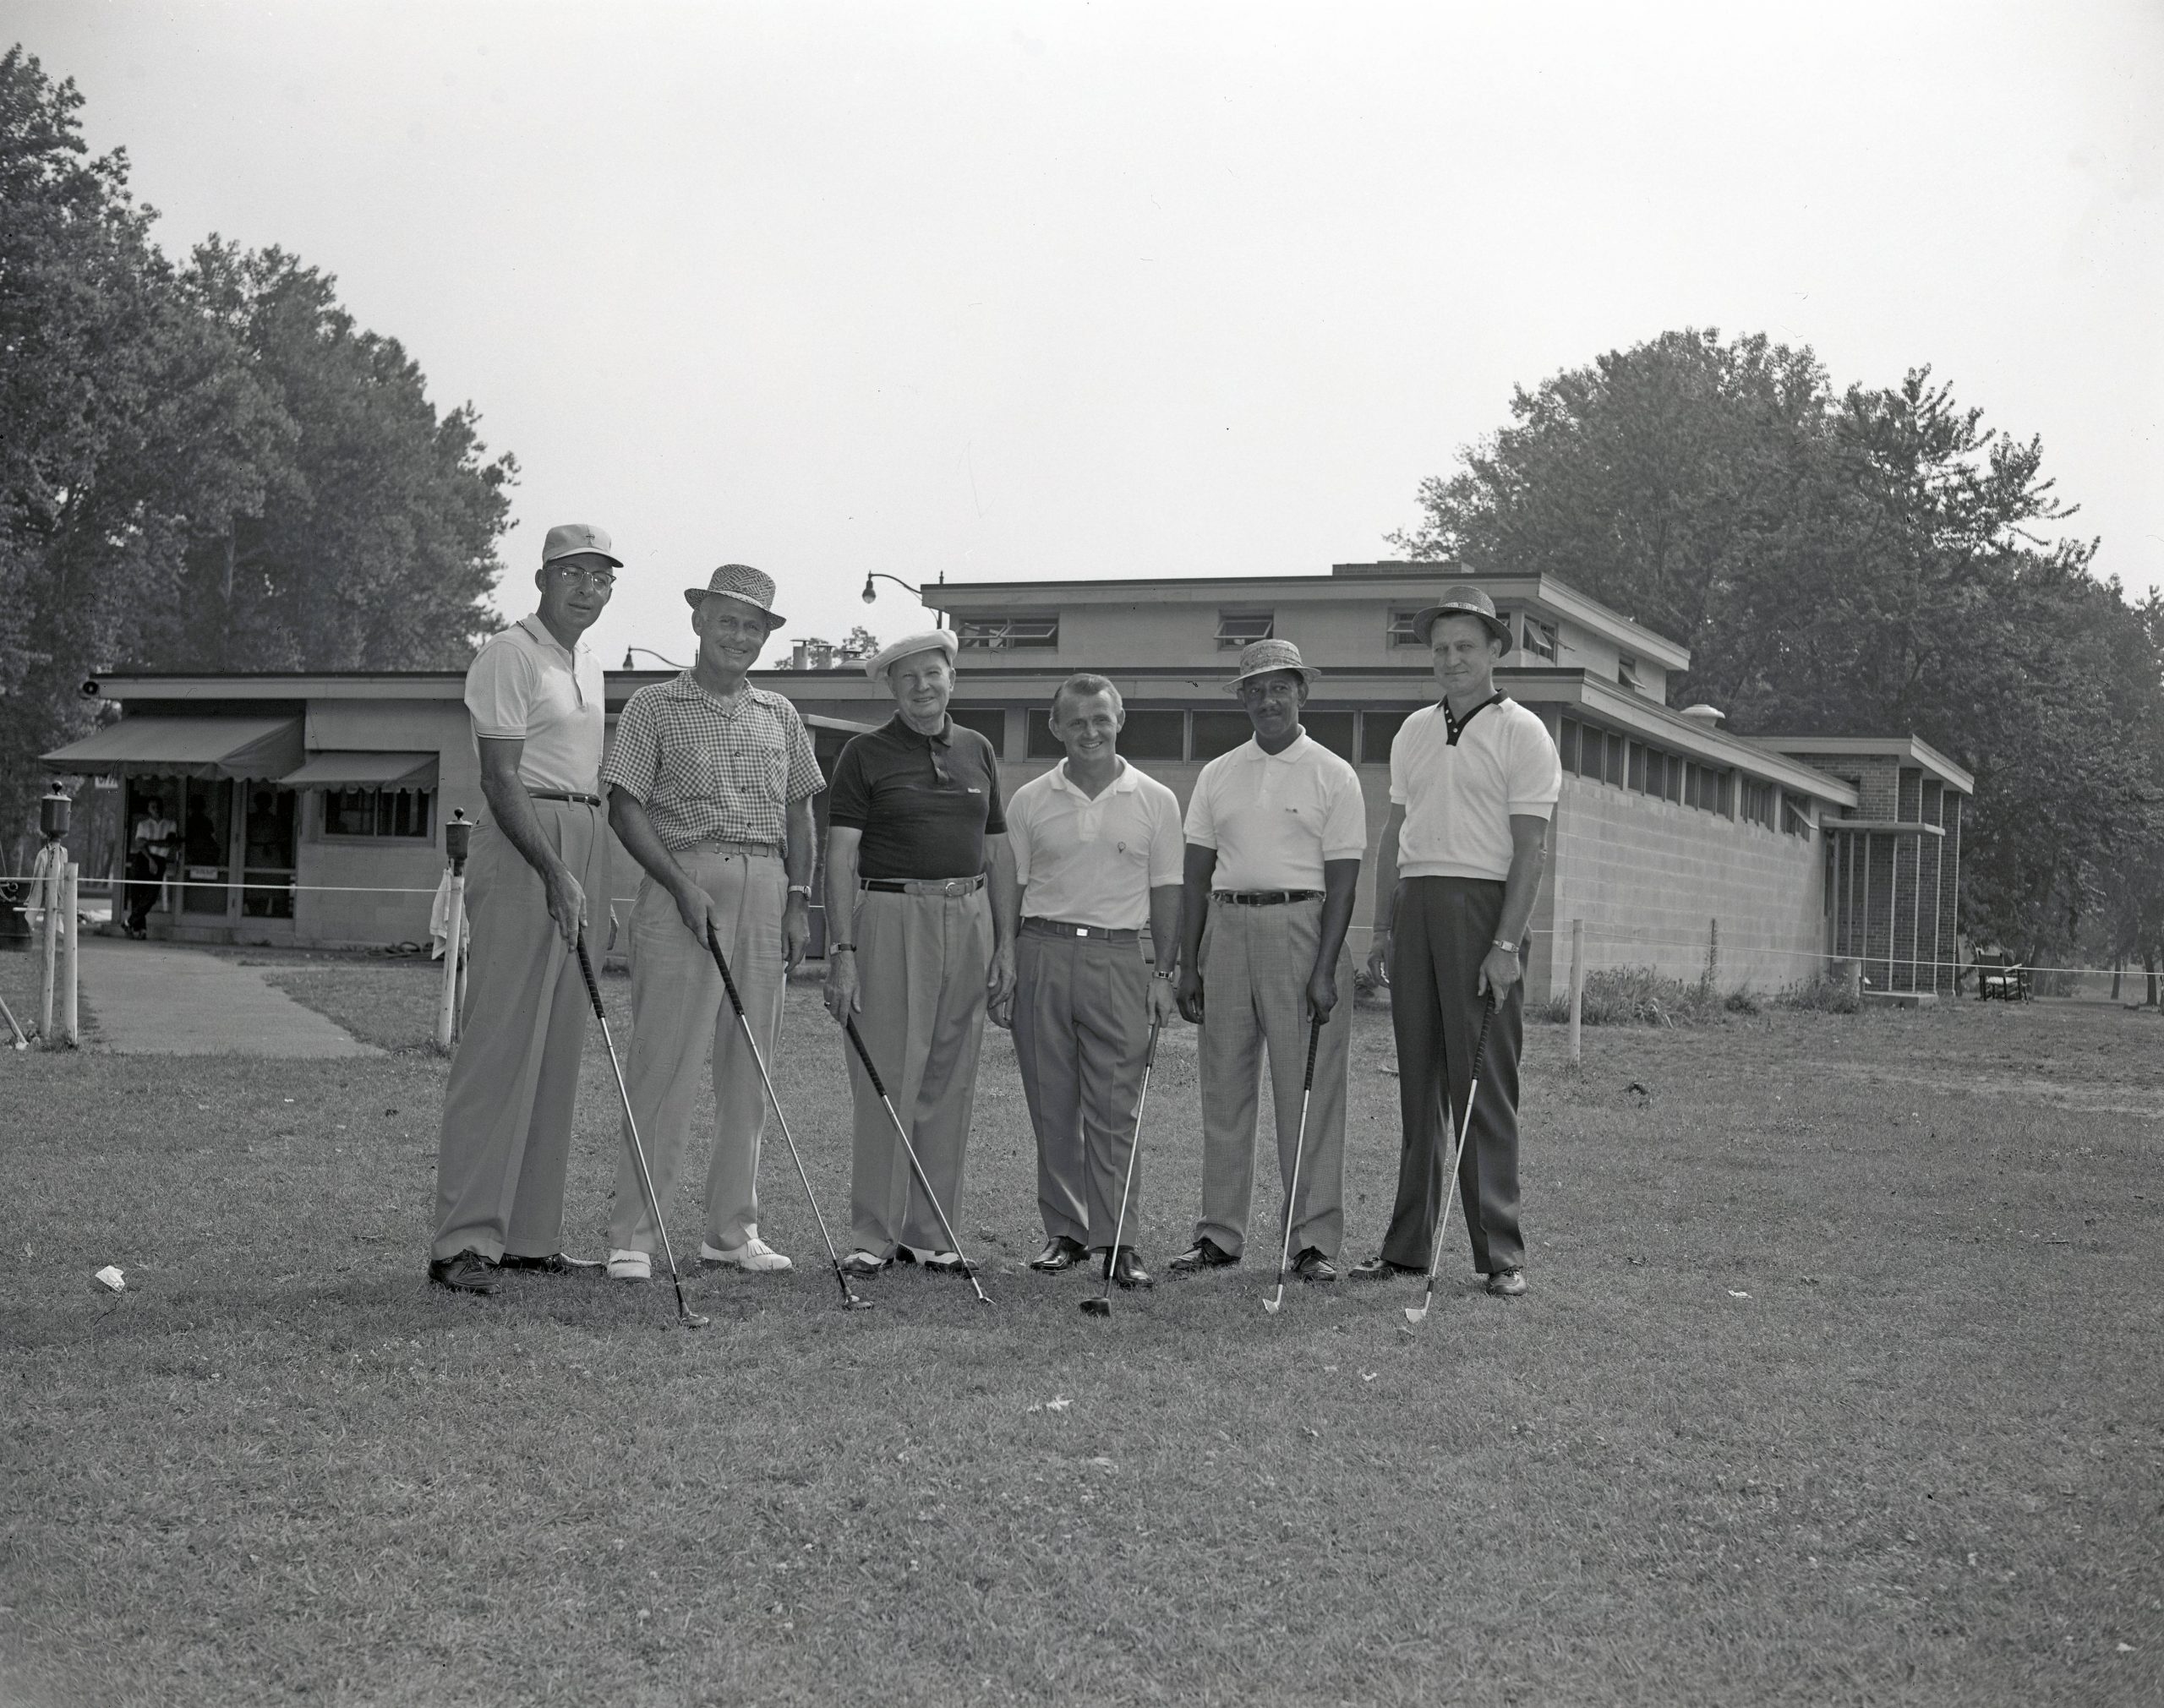 Six men stand with golf clubs on a golf course. 